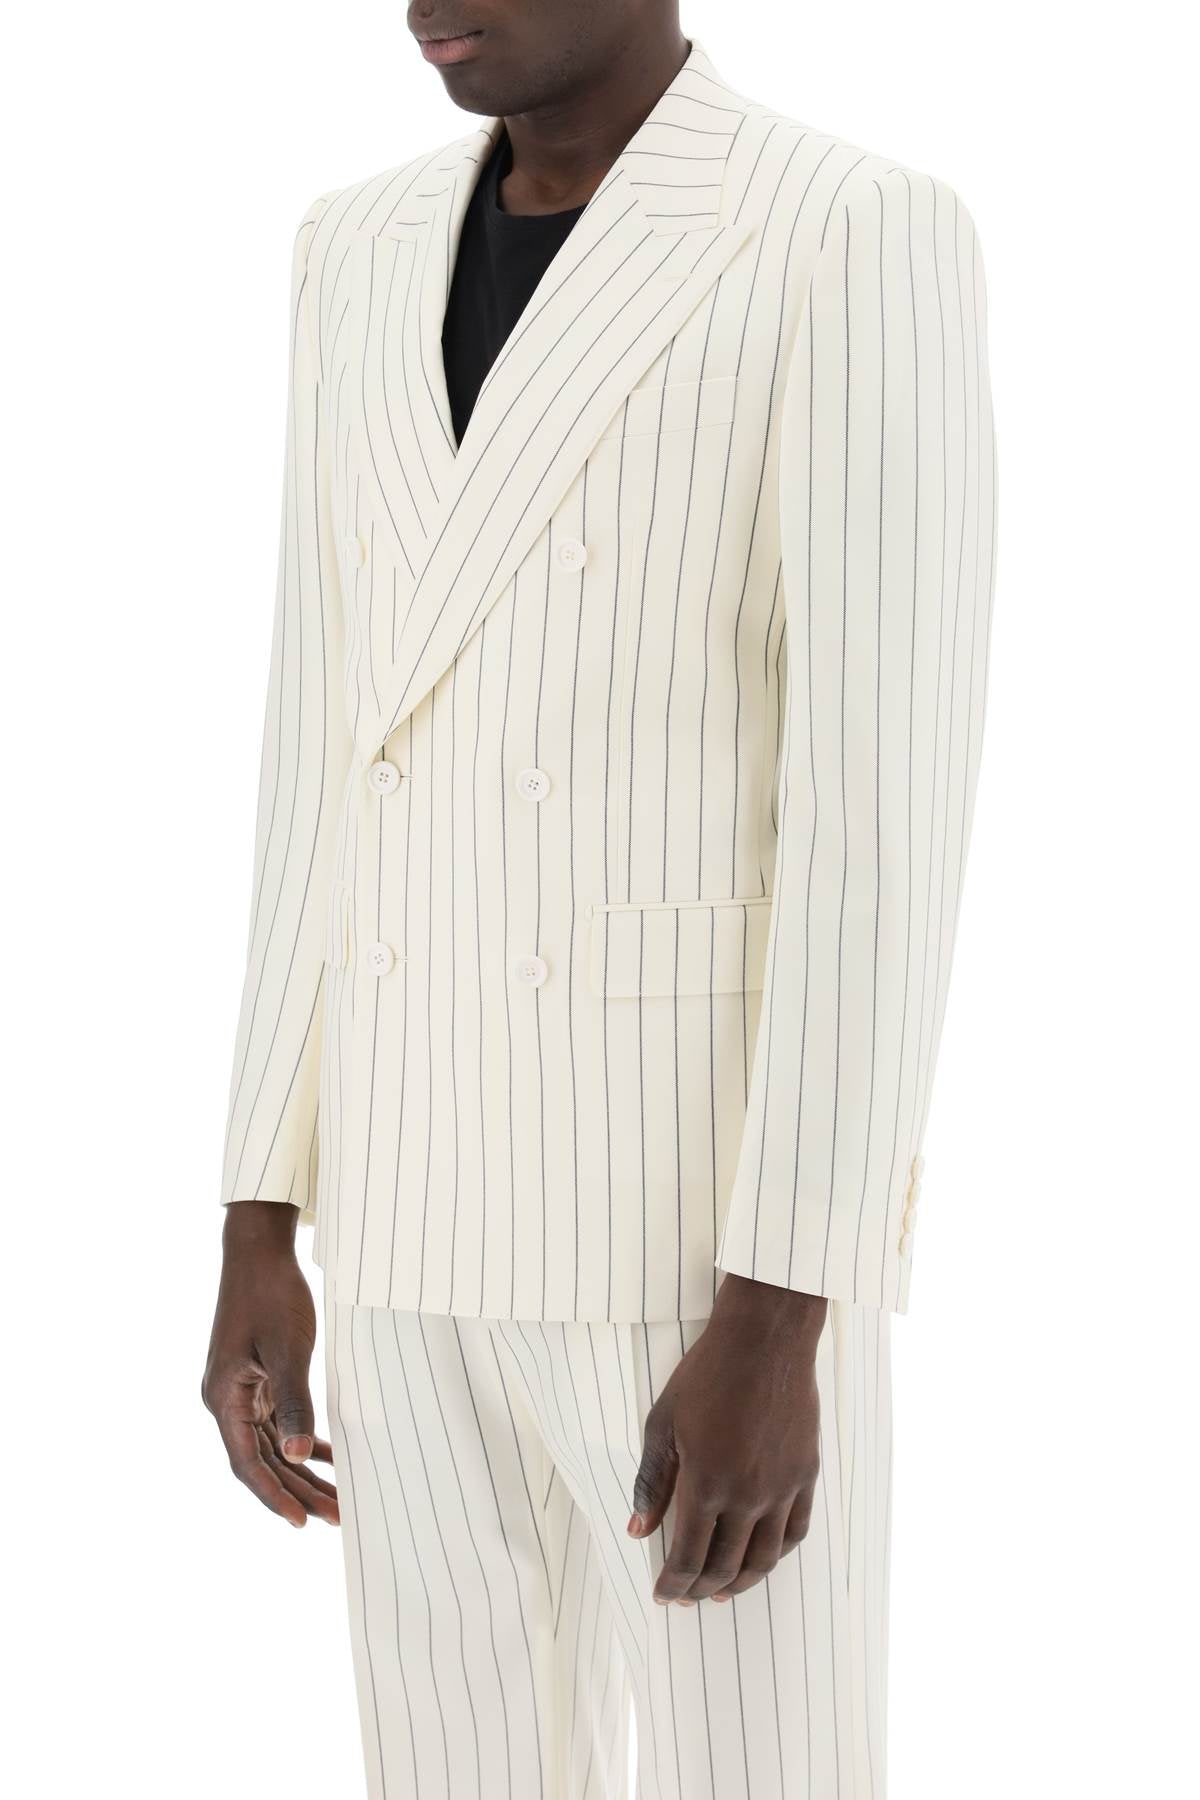 Dolce & gabbana double-breasted pinstripe-3